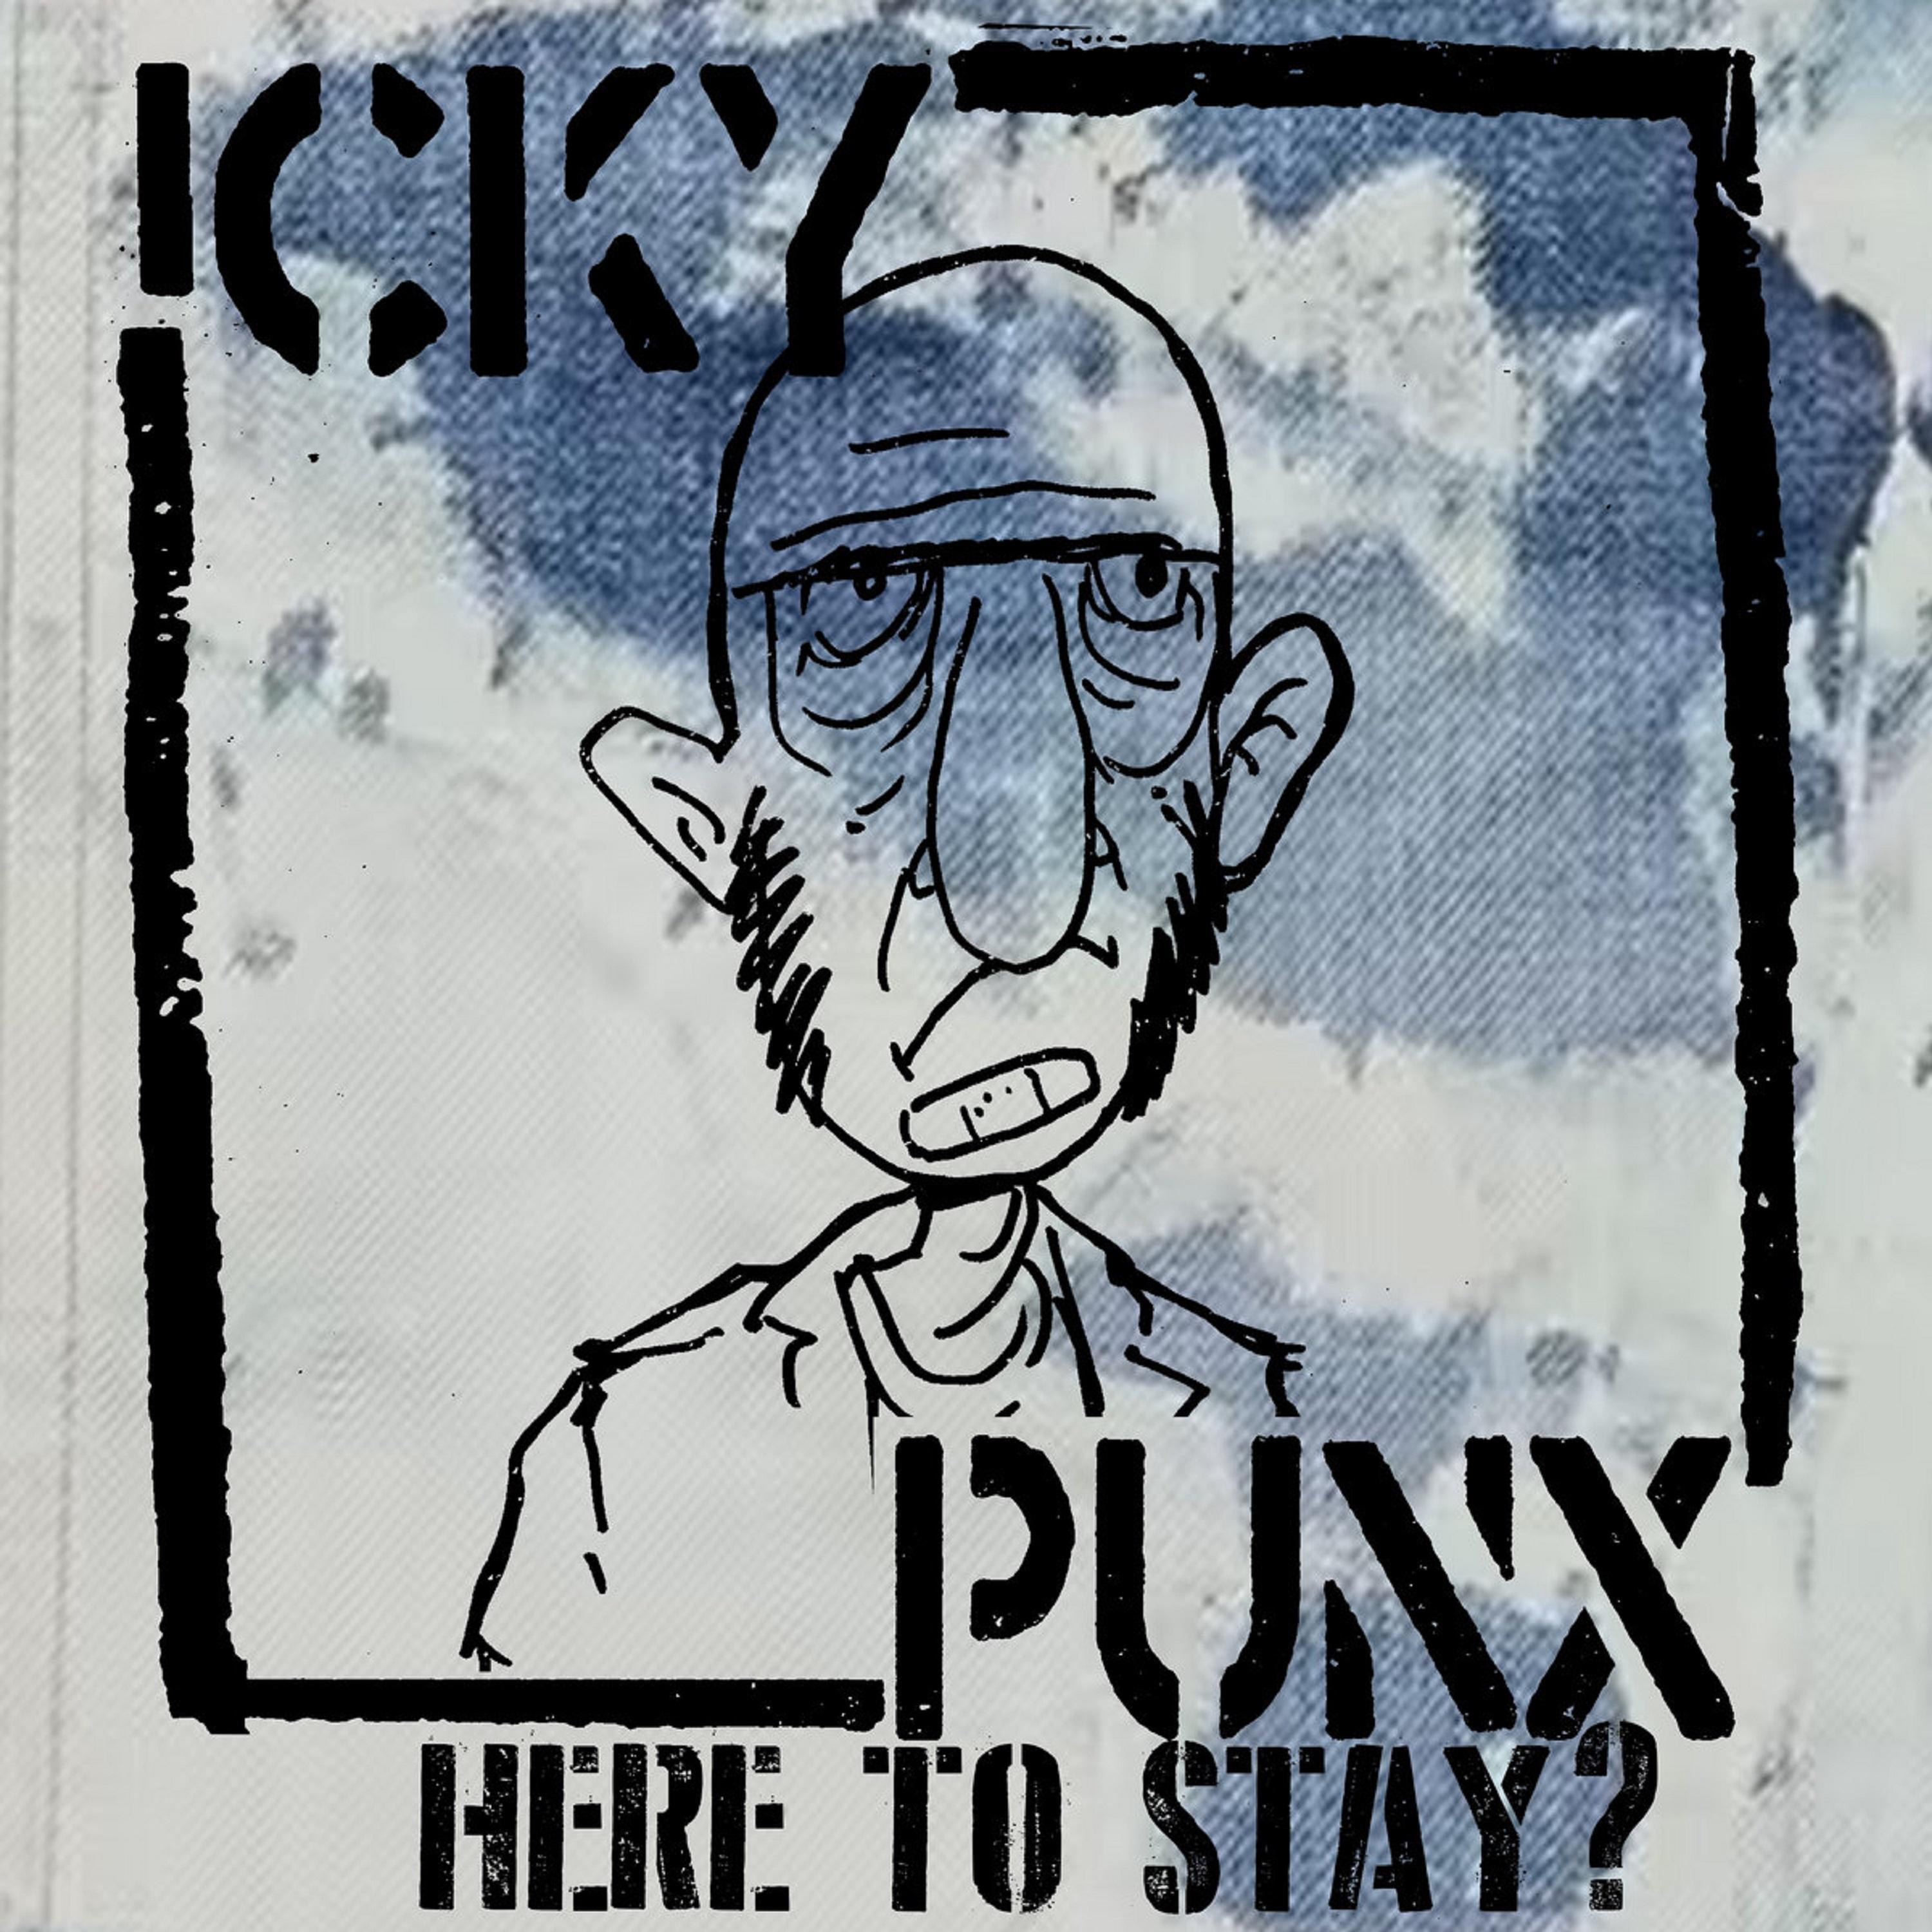 ICKY PUNX - Here to stay?